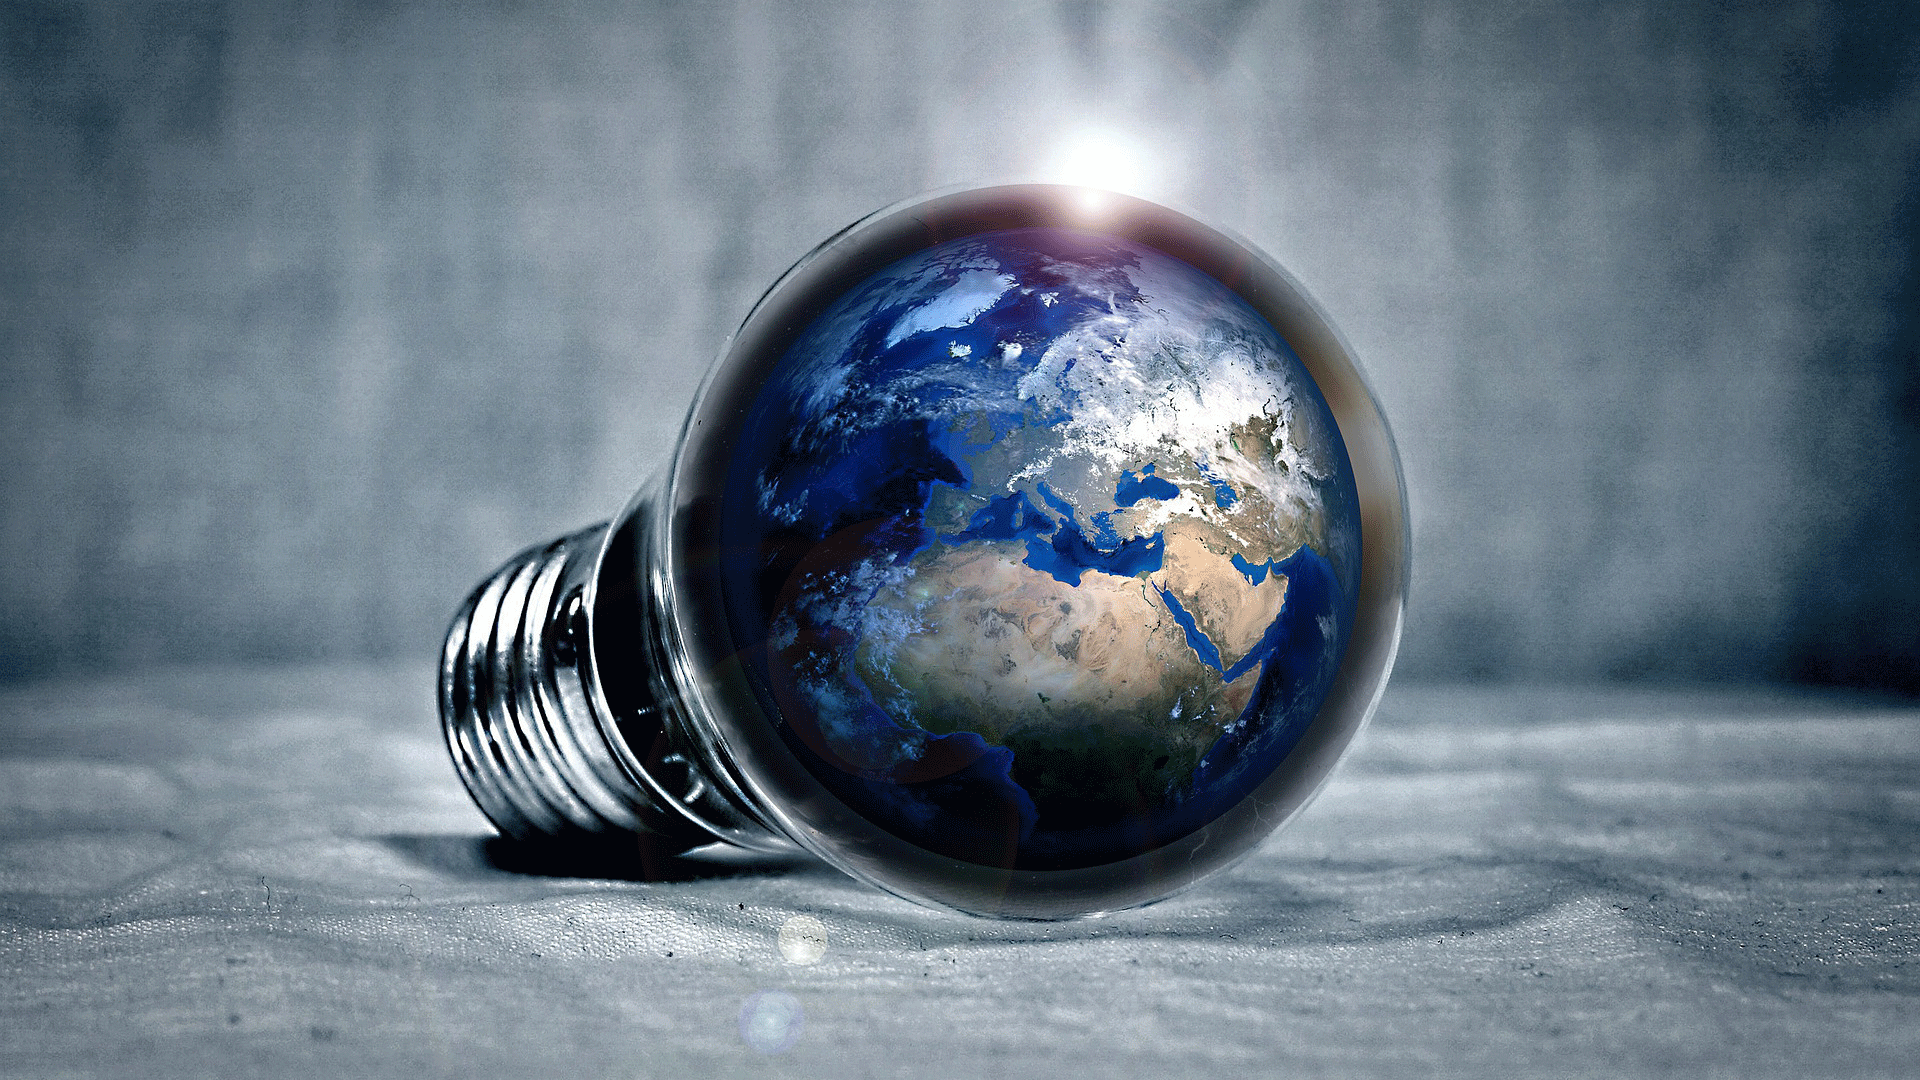 Planet earth reflected in a light bulb